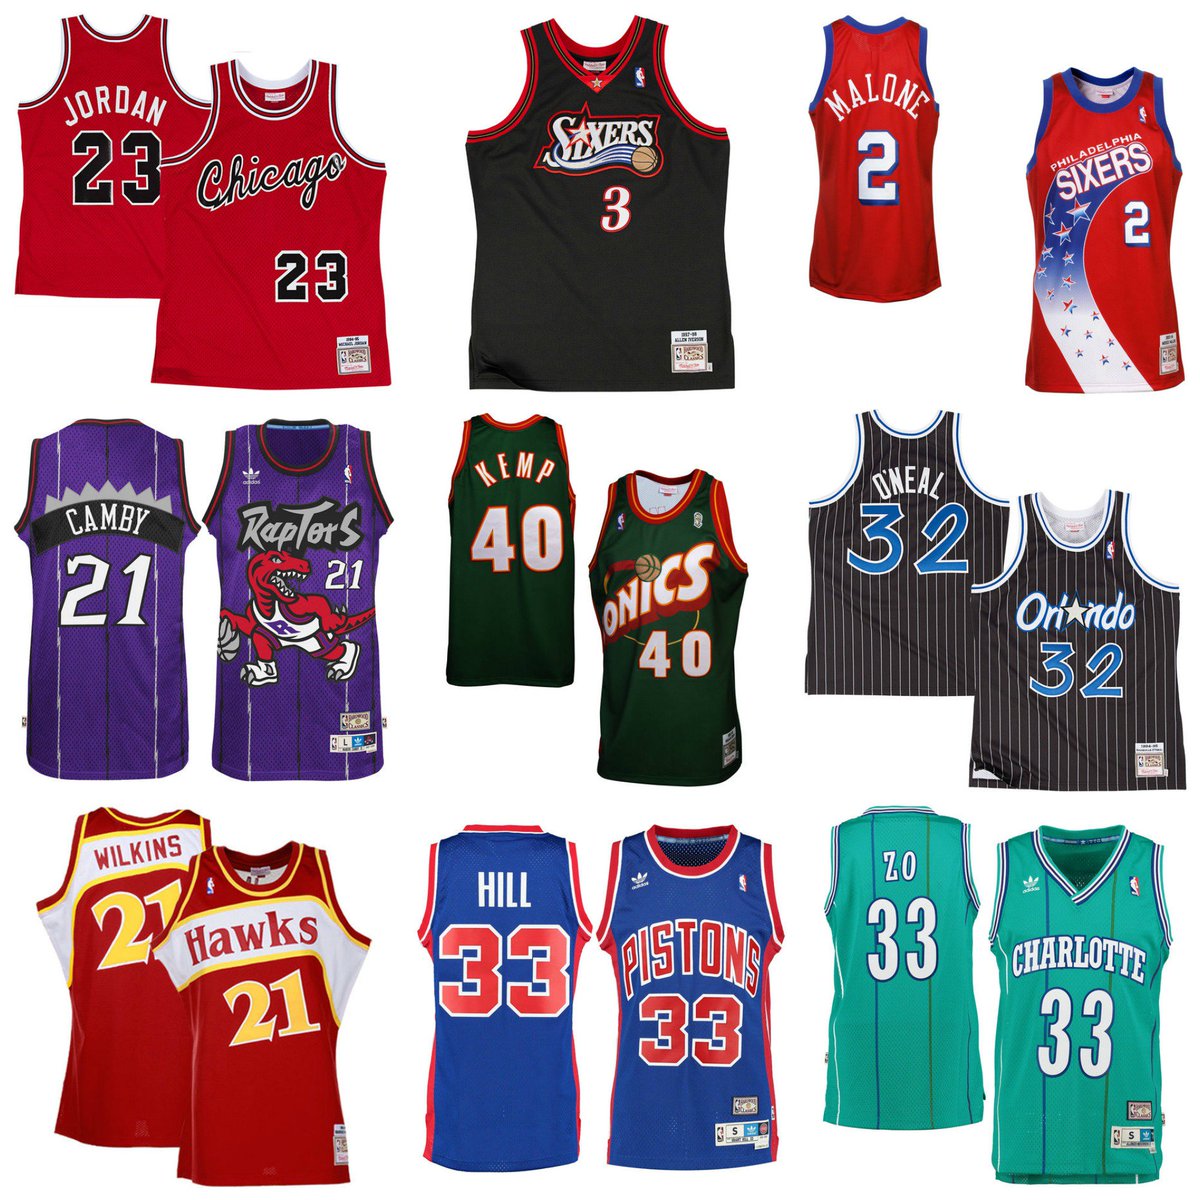 NBA Throwback Jersey Gift Guide For All 30 Teams - Page 7